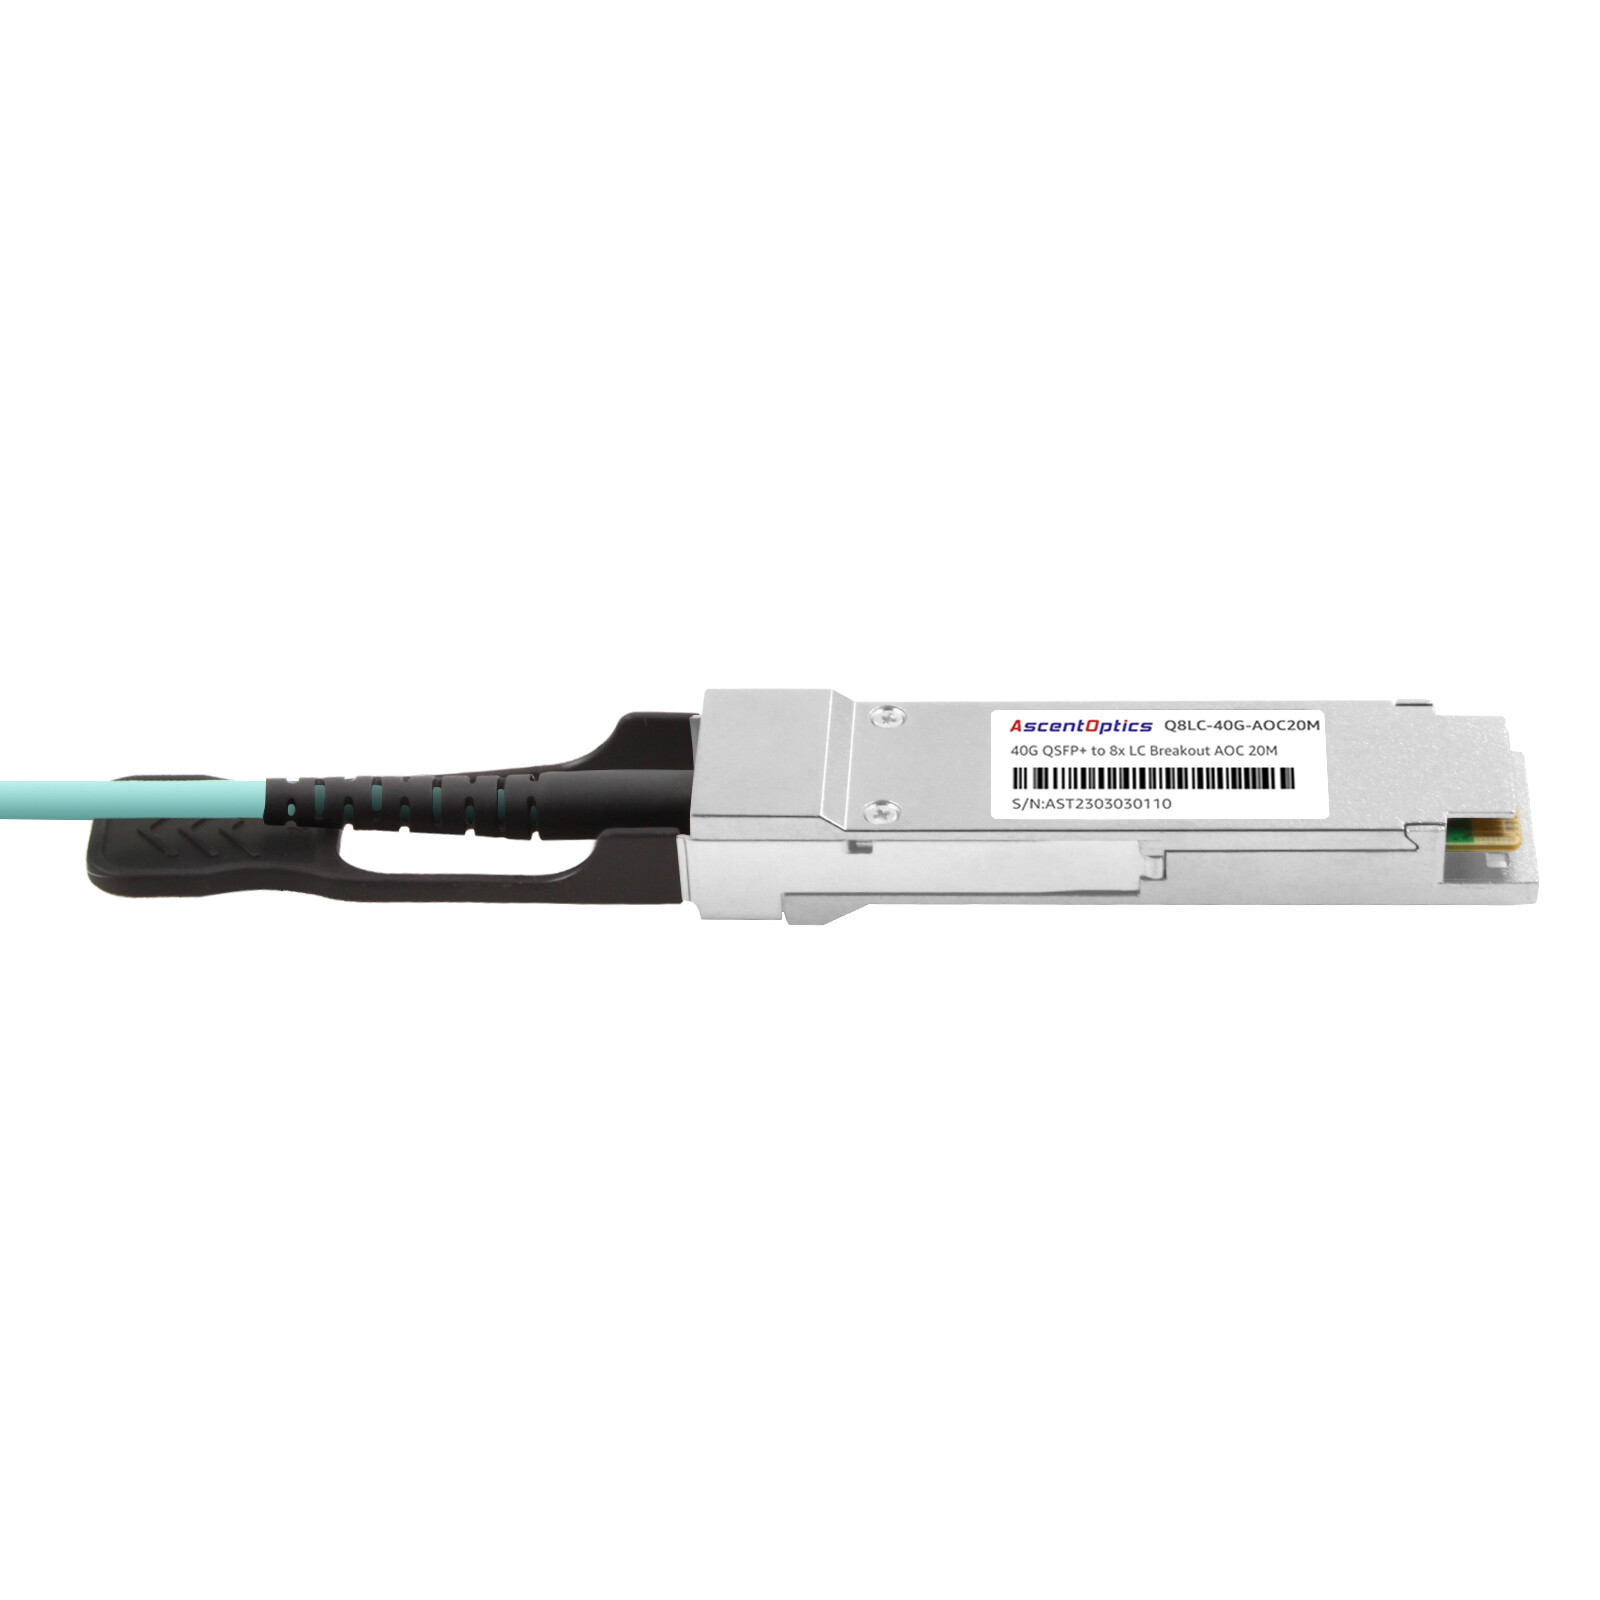 40G QSFP+ to 8x LC Breakout AOC Cable,20 Meters